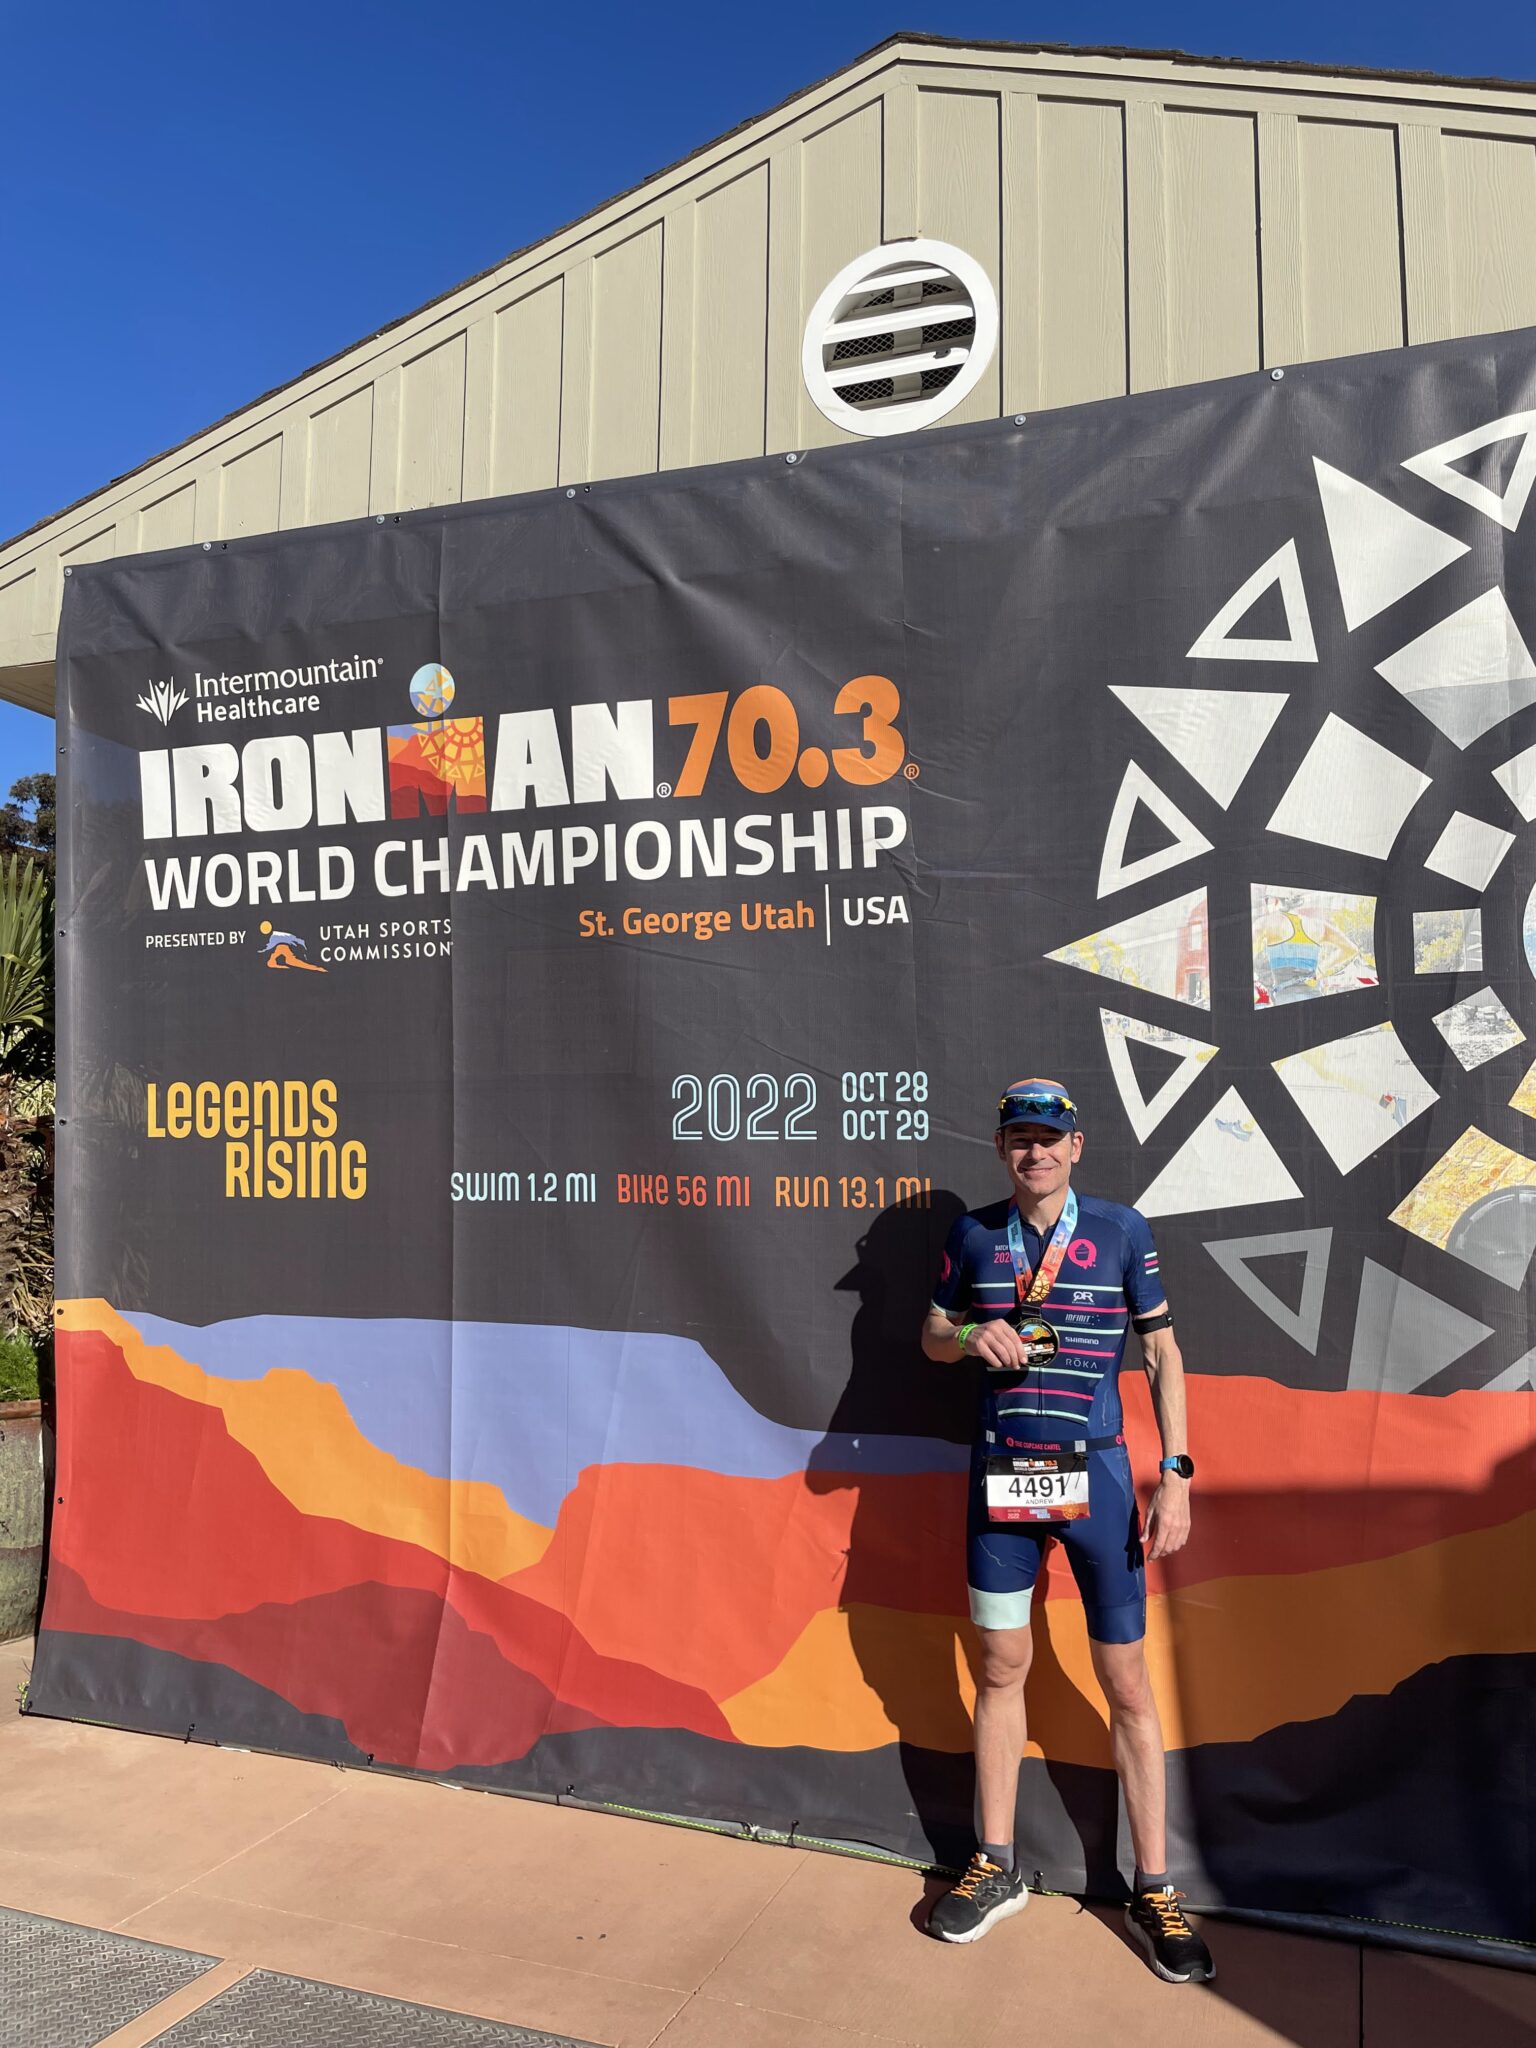 How to Qualify for the Ironman 70.3 World Champs: 6 Tips